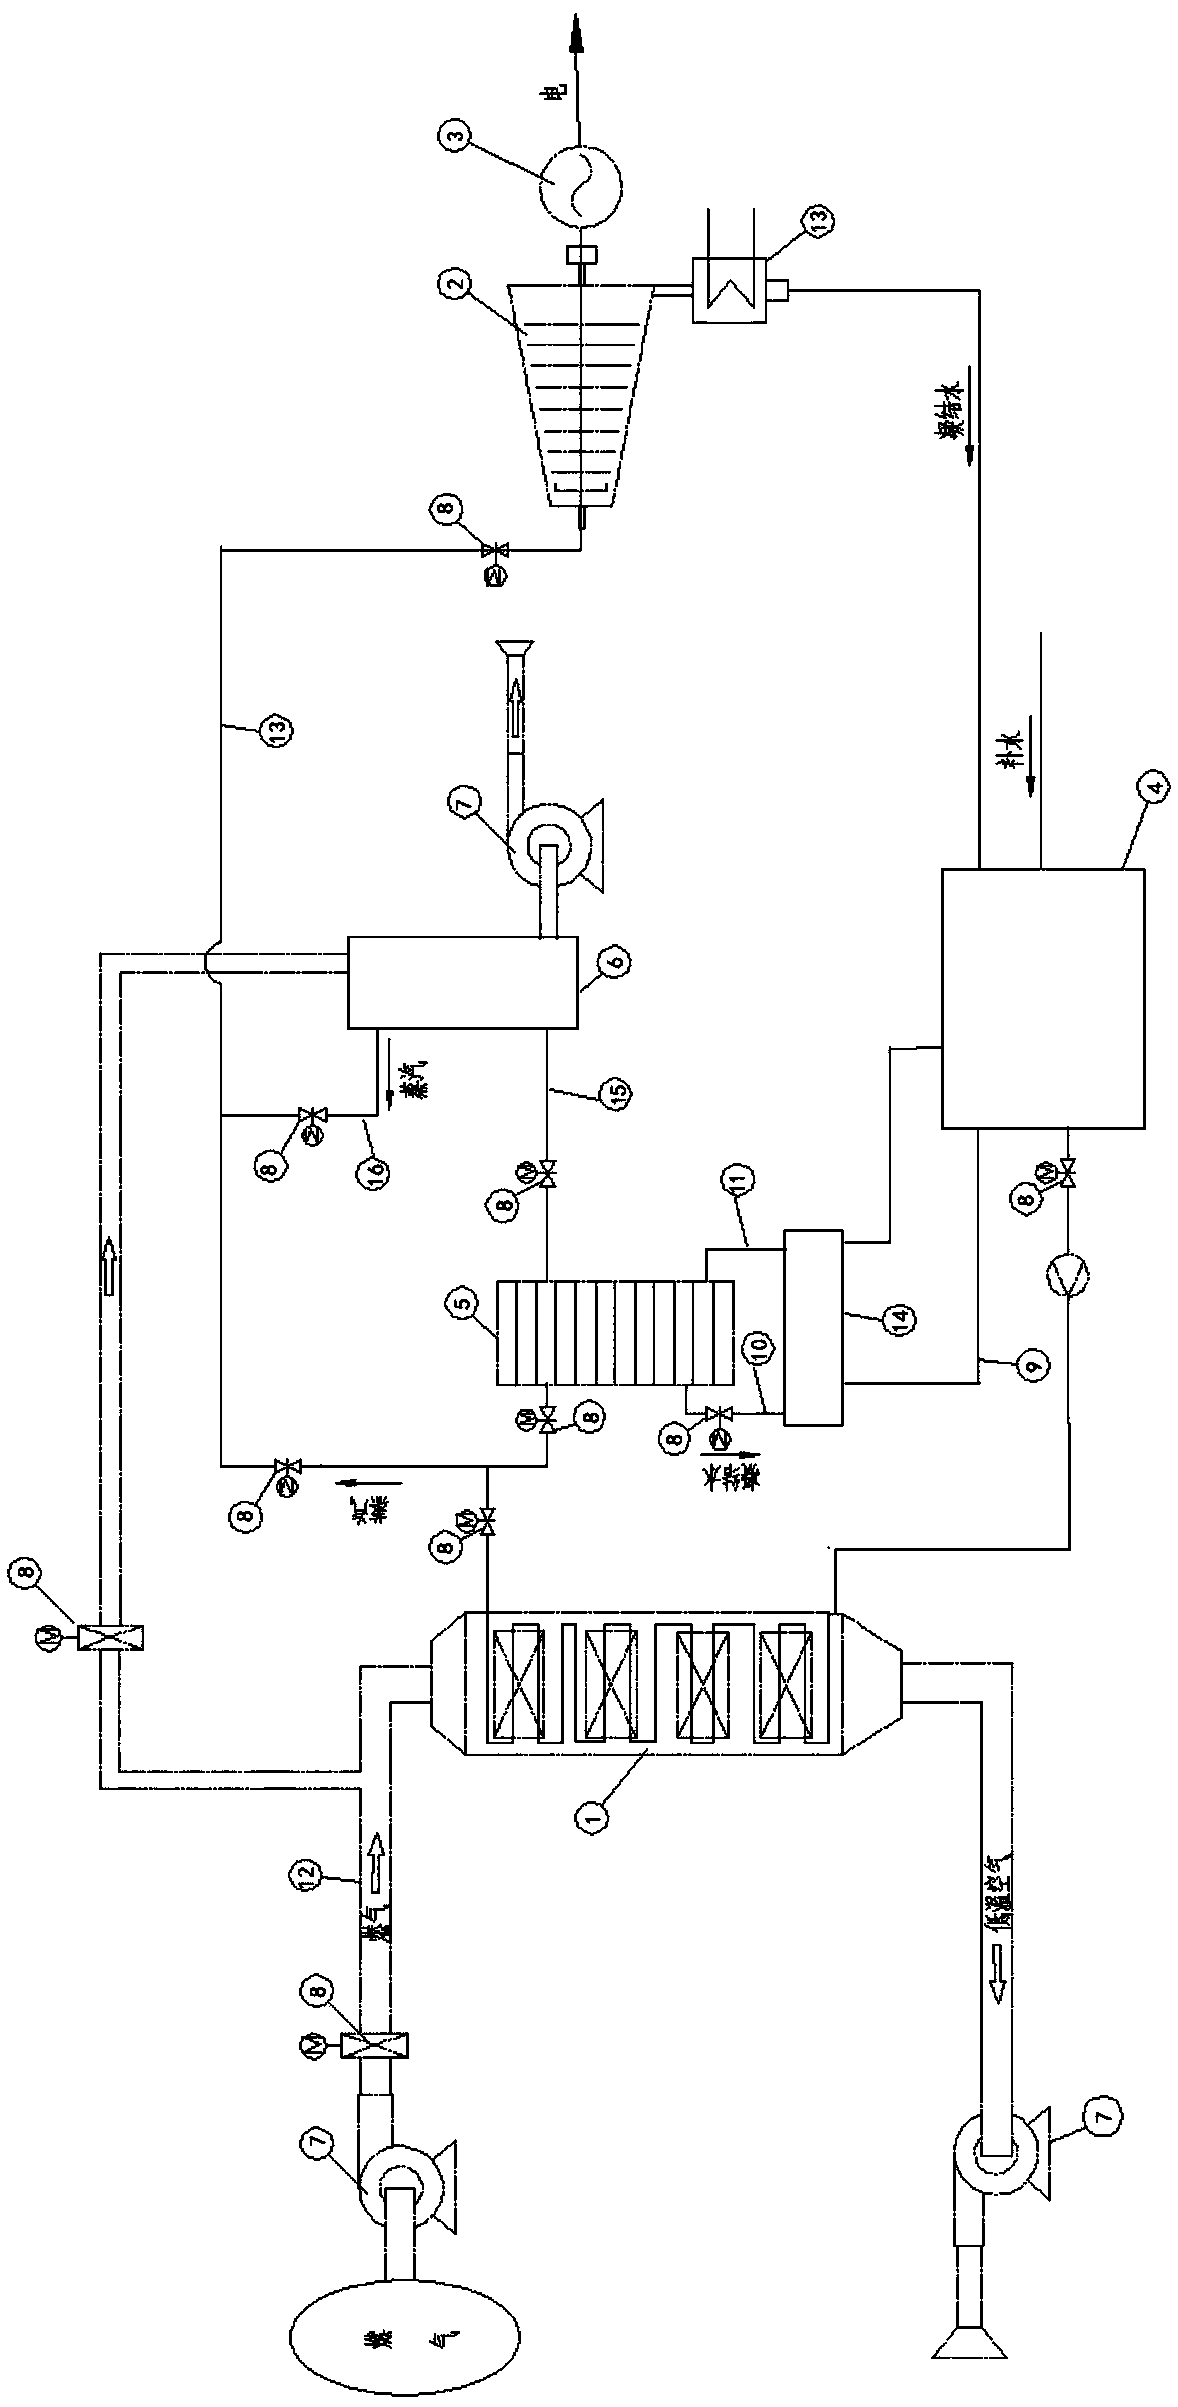 Heat accumulation system combining auxiliary heating device, heat accumulation device and solid heat accumulation body